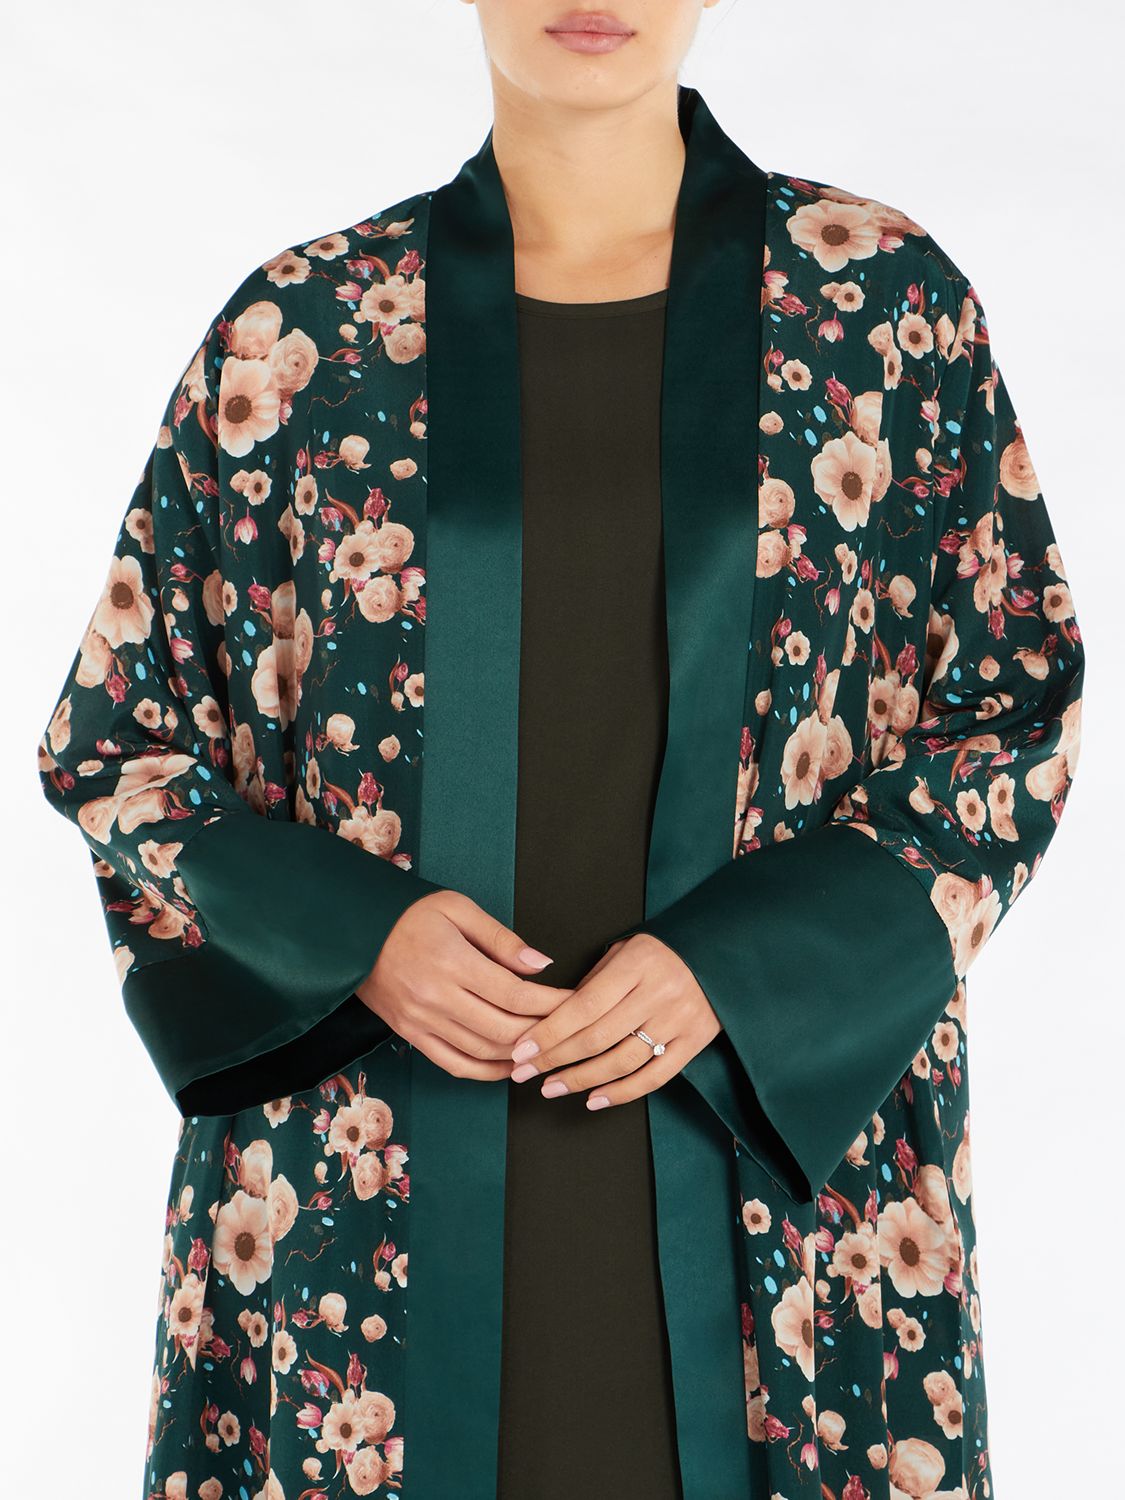 Buy Aab Cosmos Floral Kimono, Multi Online at johnlewis.com